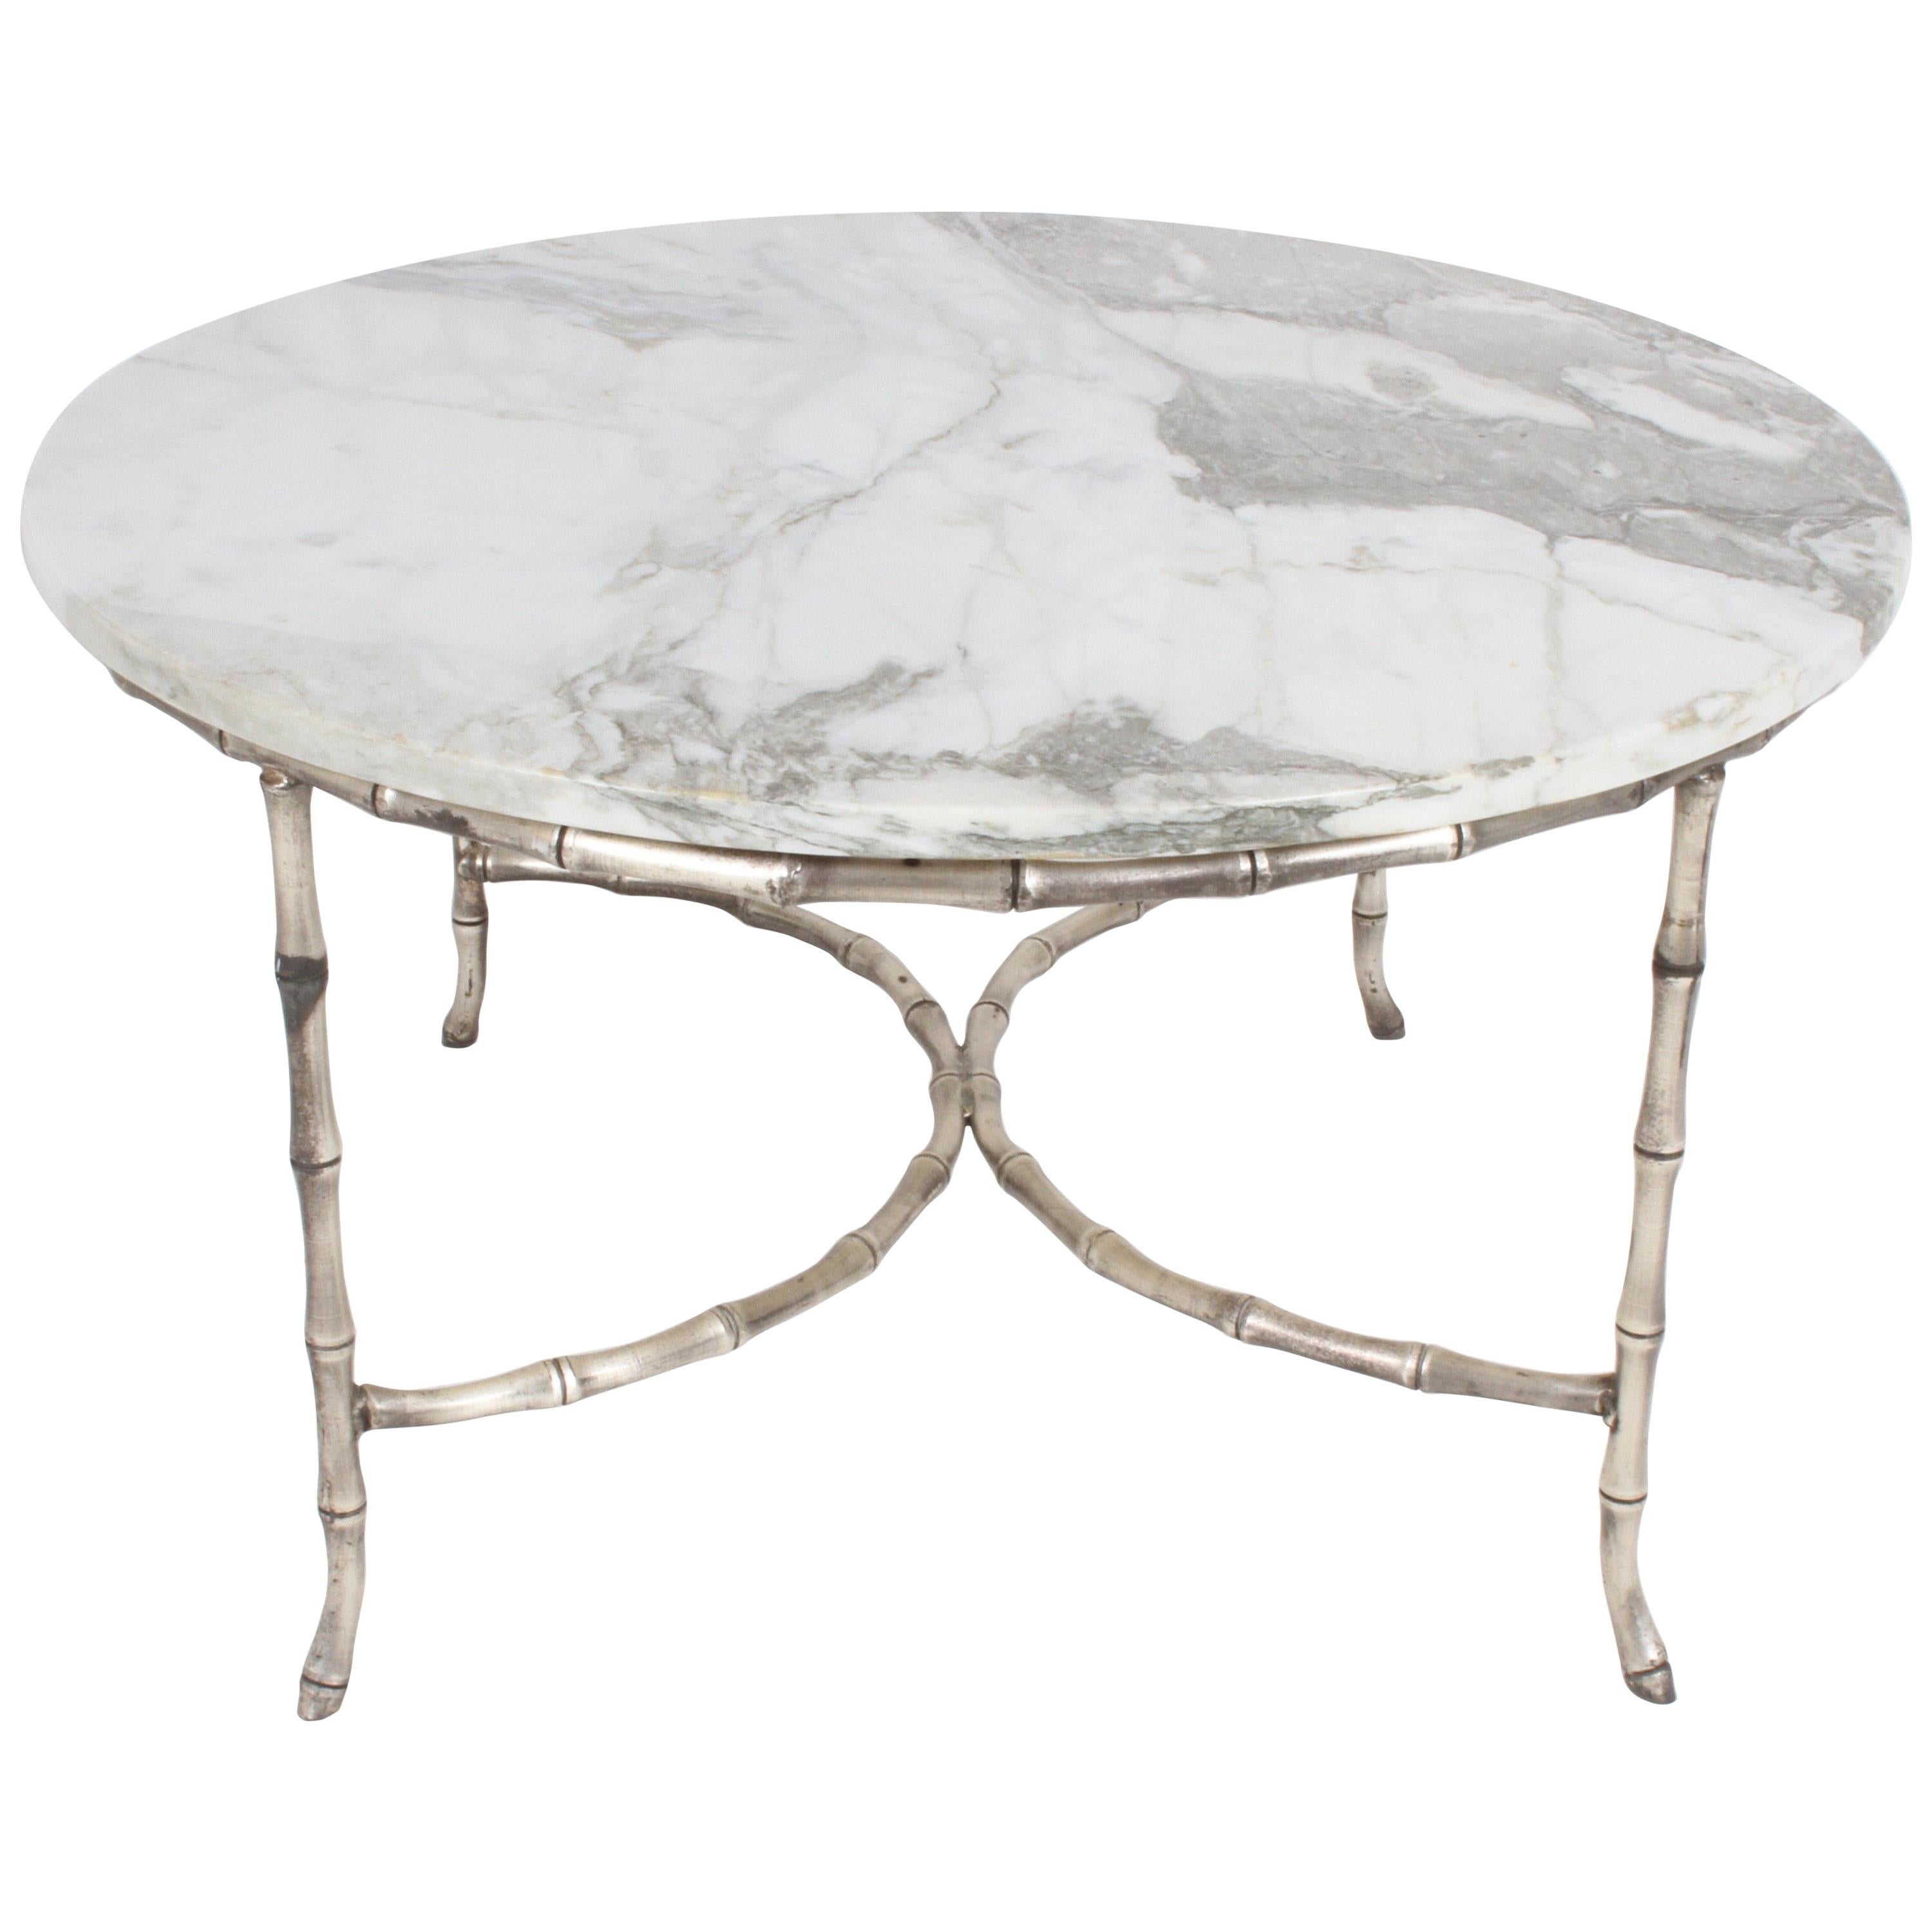 Italian Silver Plated Faux Bamboo Marble Top Coffee or Side Table